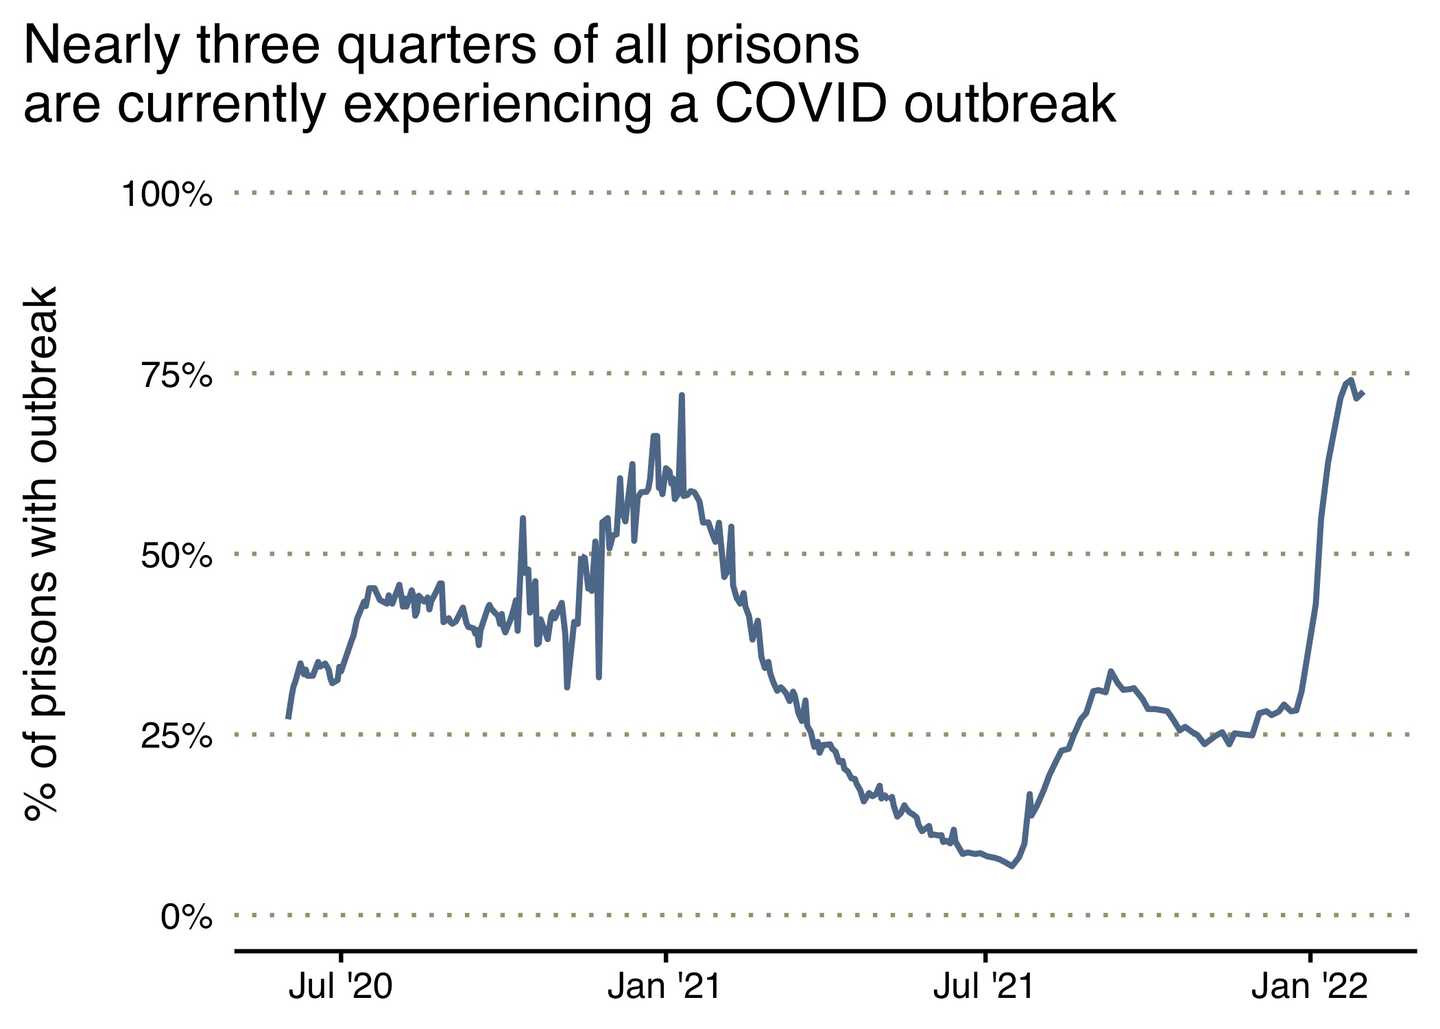 Graph showing that nearly three quarters of all federal prisons are currently experiencing an outbreak